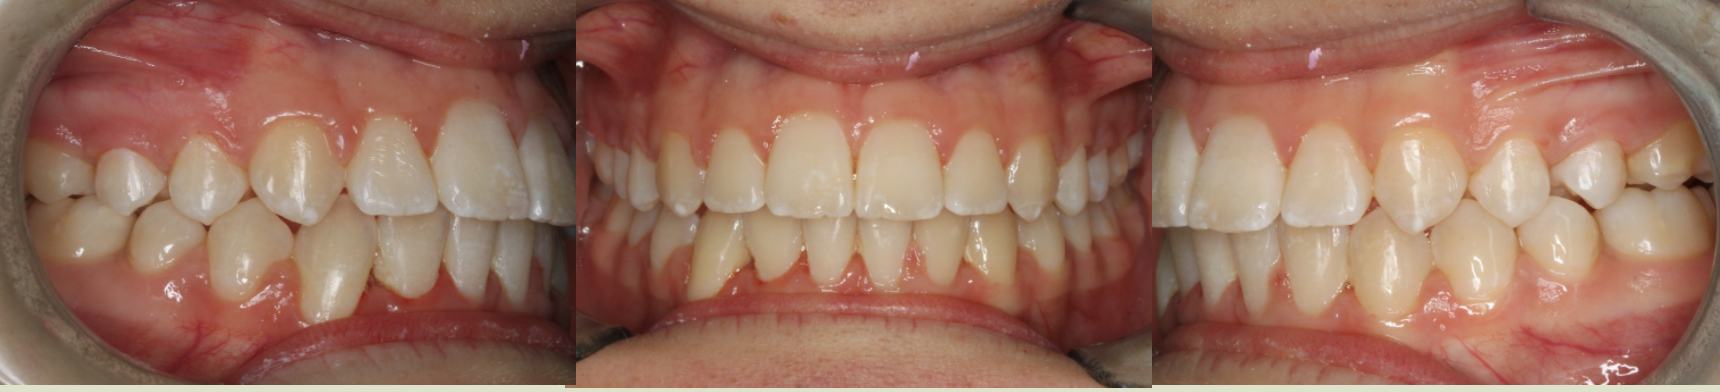 After photo (front view of teeth): Severe Dental Crowding - Palate Expander & Braces, Case Study #6